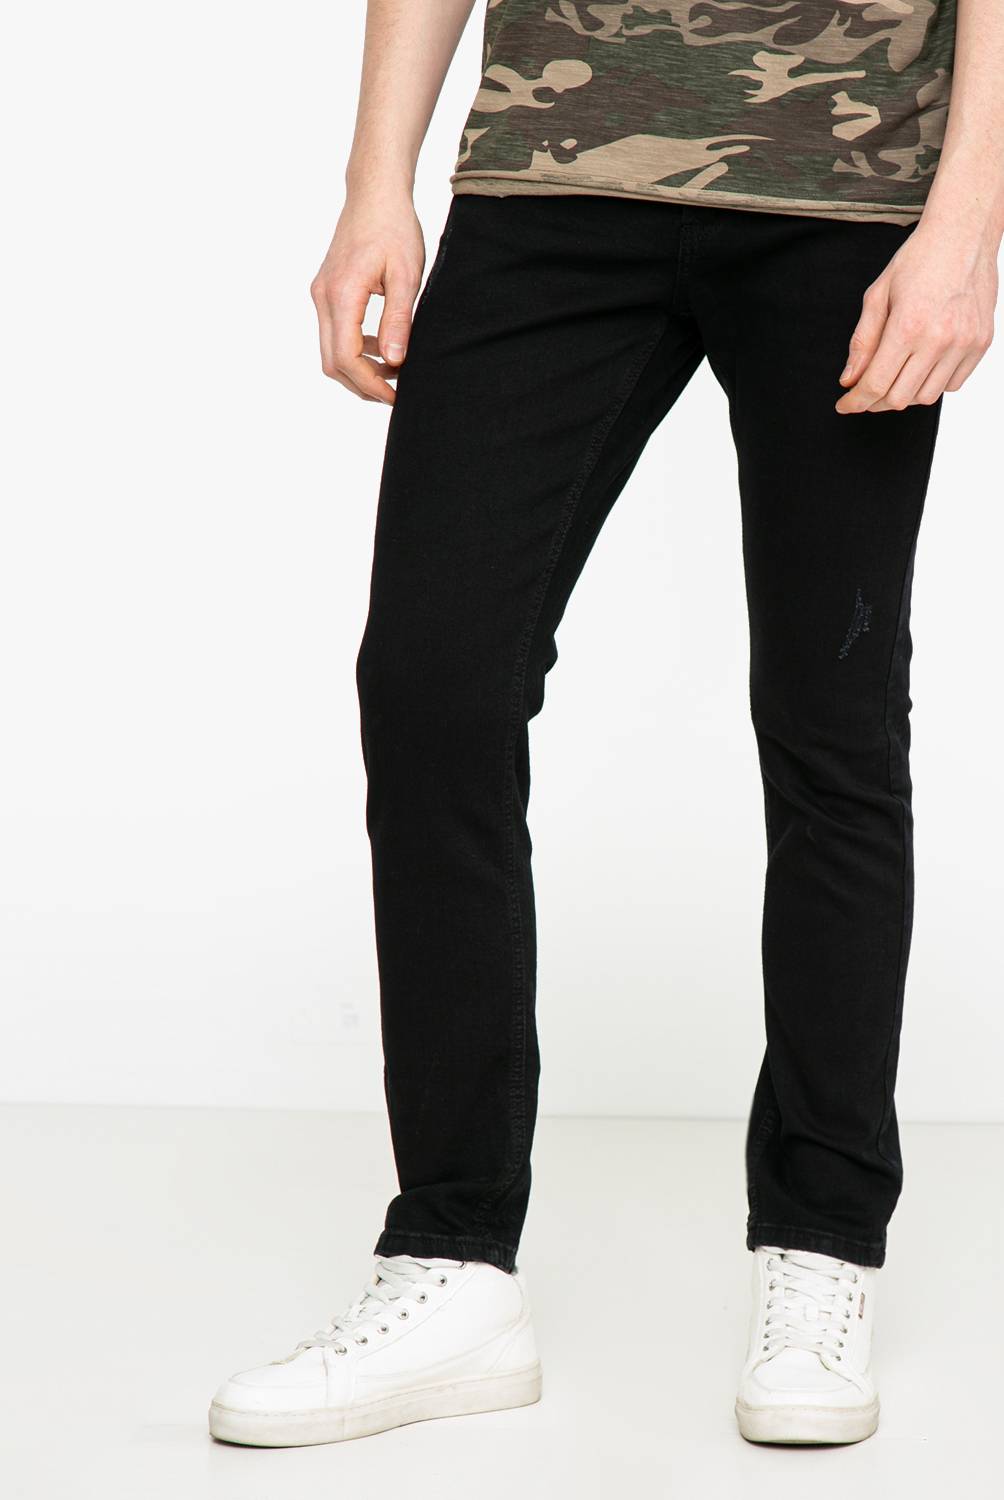 BEARCLIFF - Bearcliff Jeans Skinny Fit Hombre